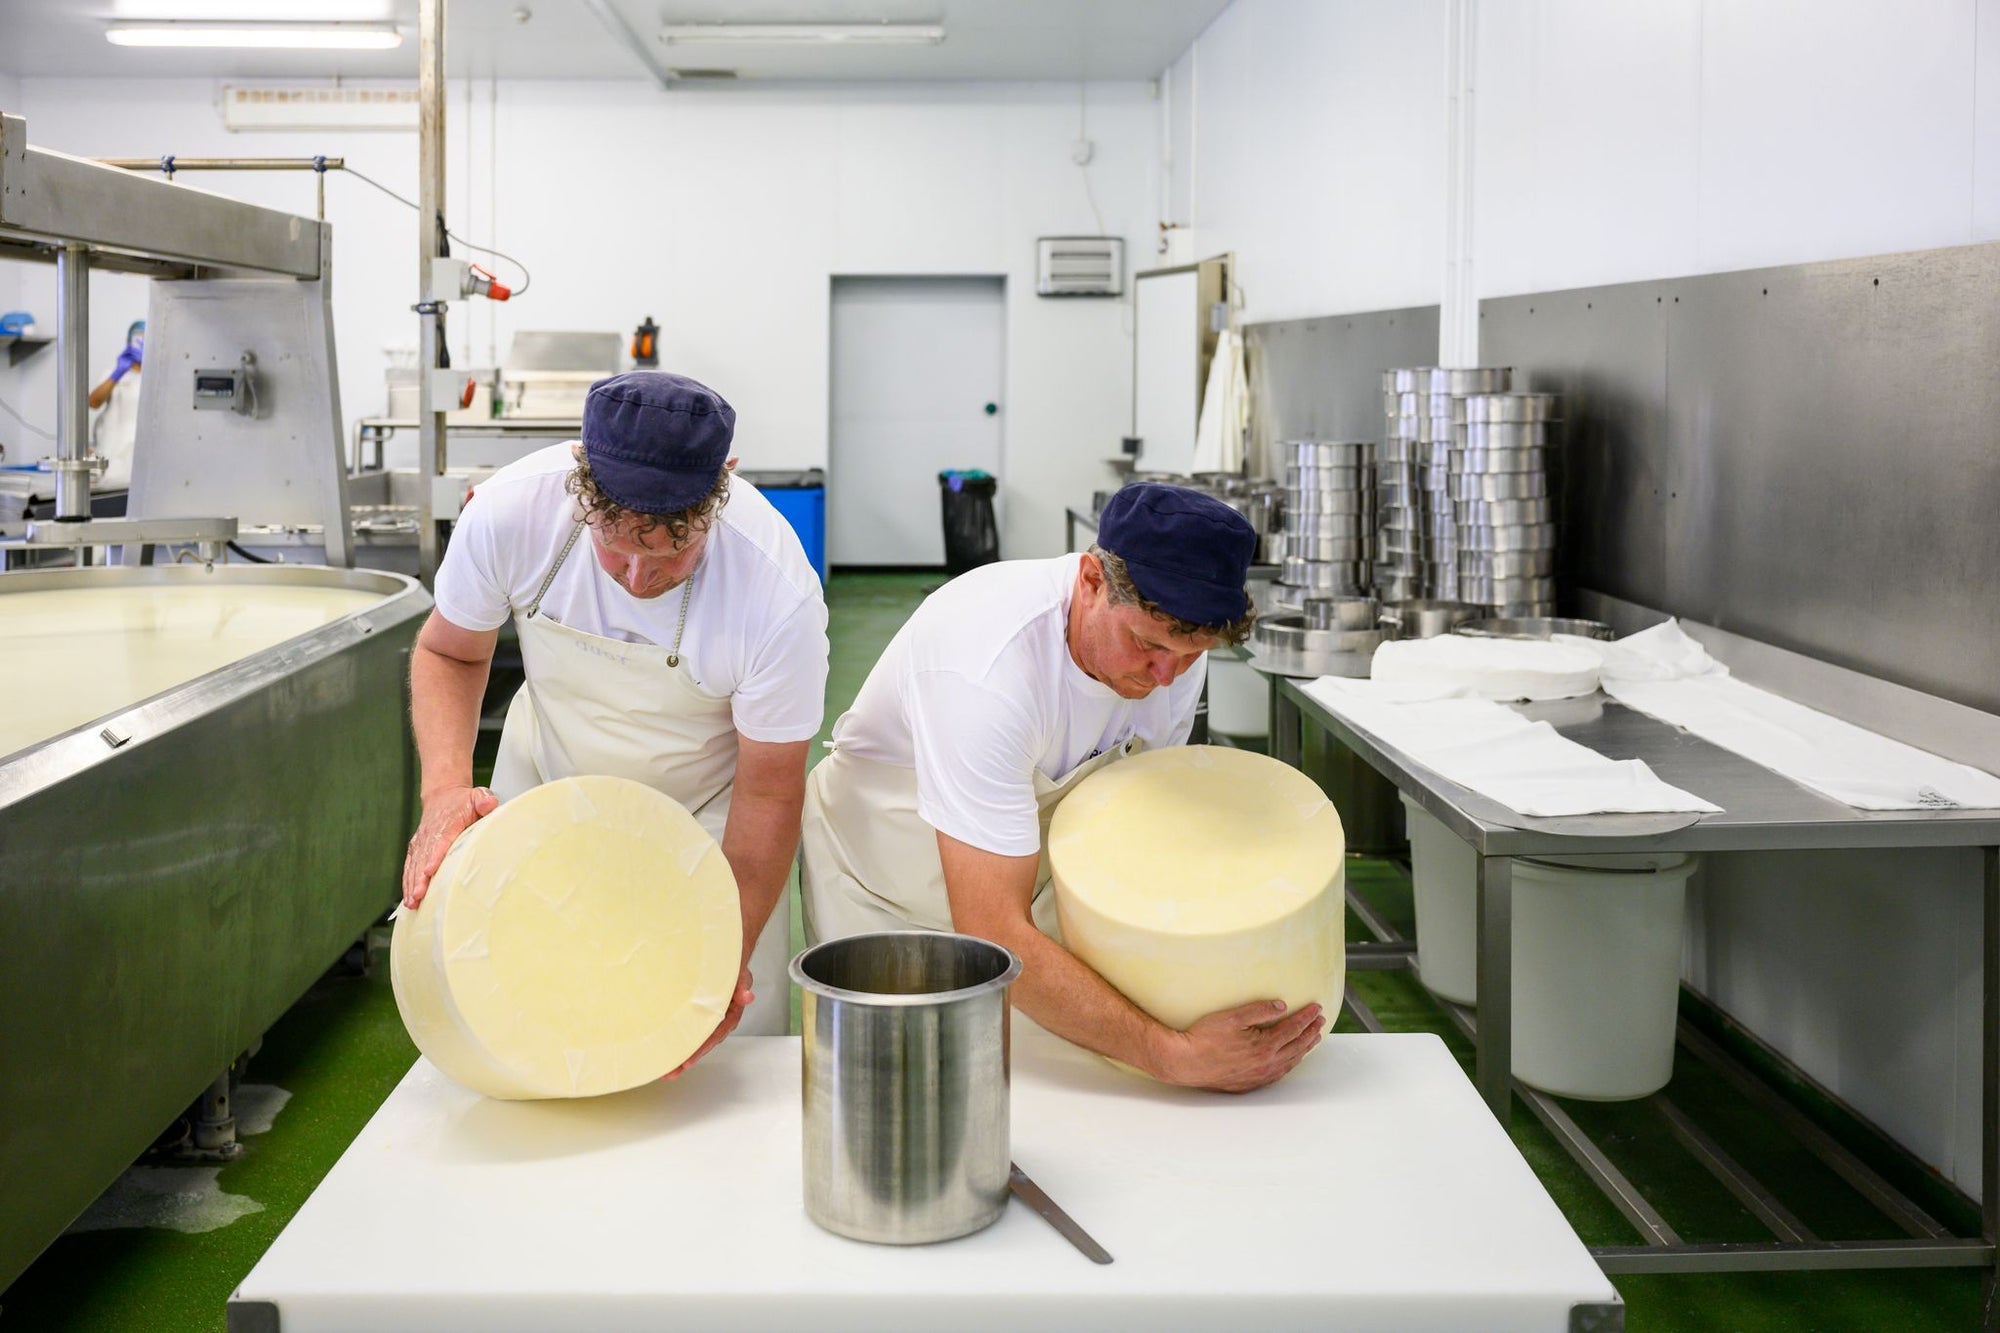 It's our 25th anniversary of cheesemaking!